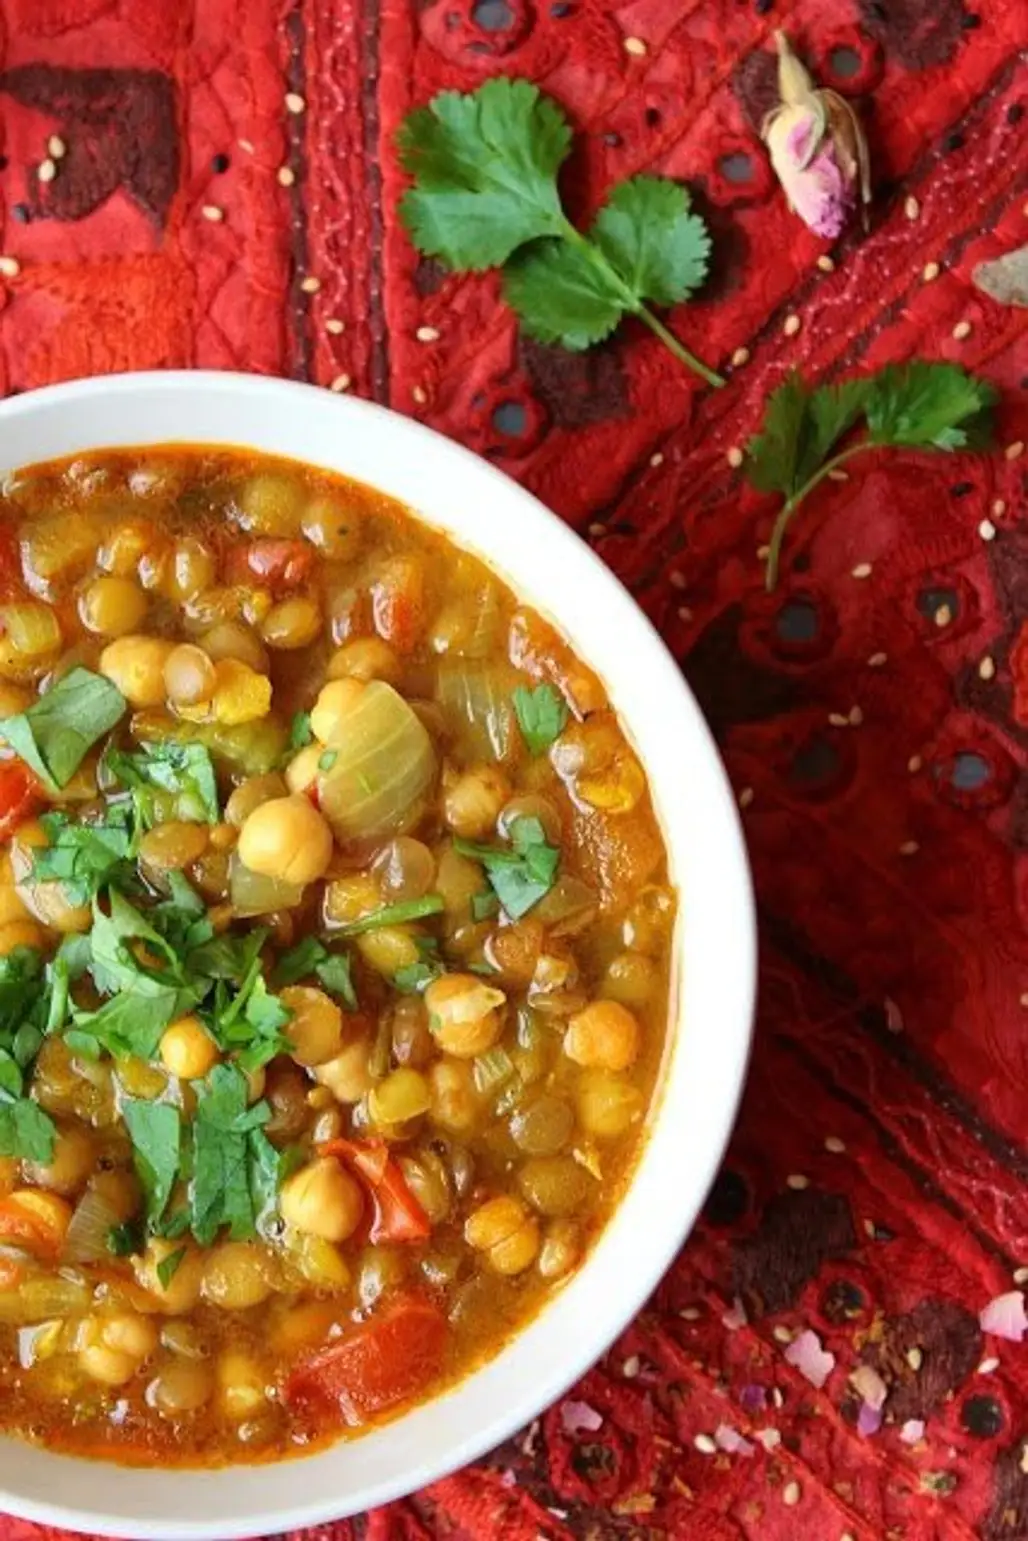 Harira is a Spiced and Warming Moroccan Soup Based on Lentils